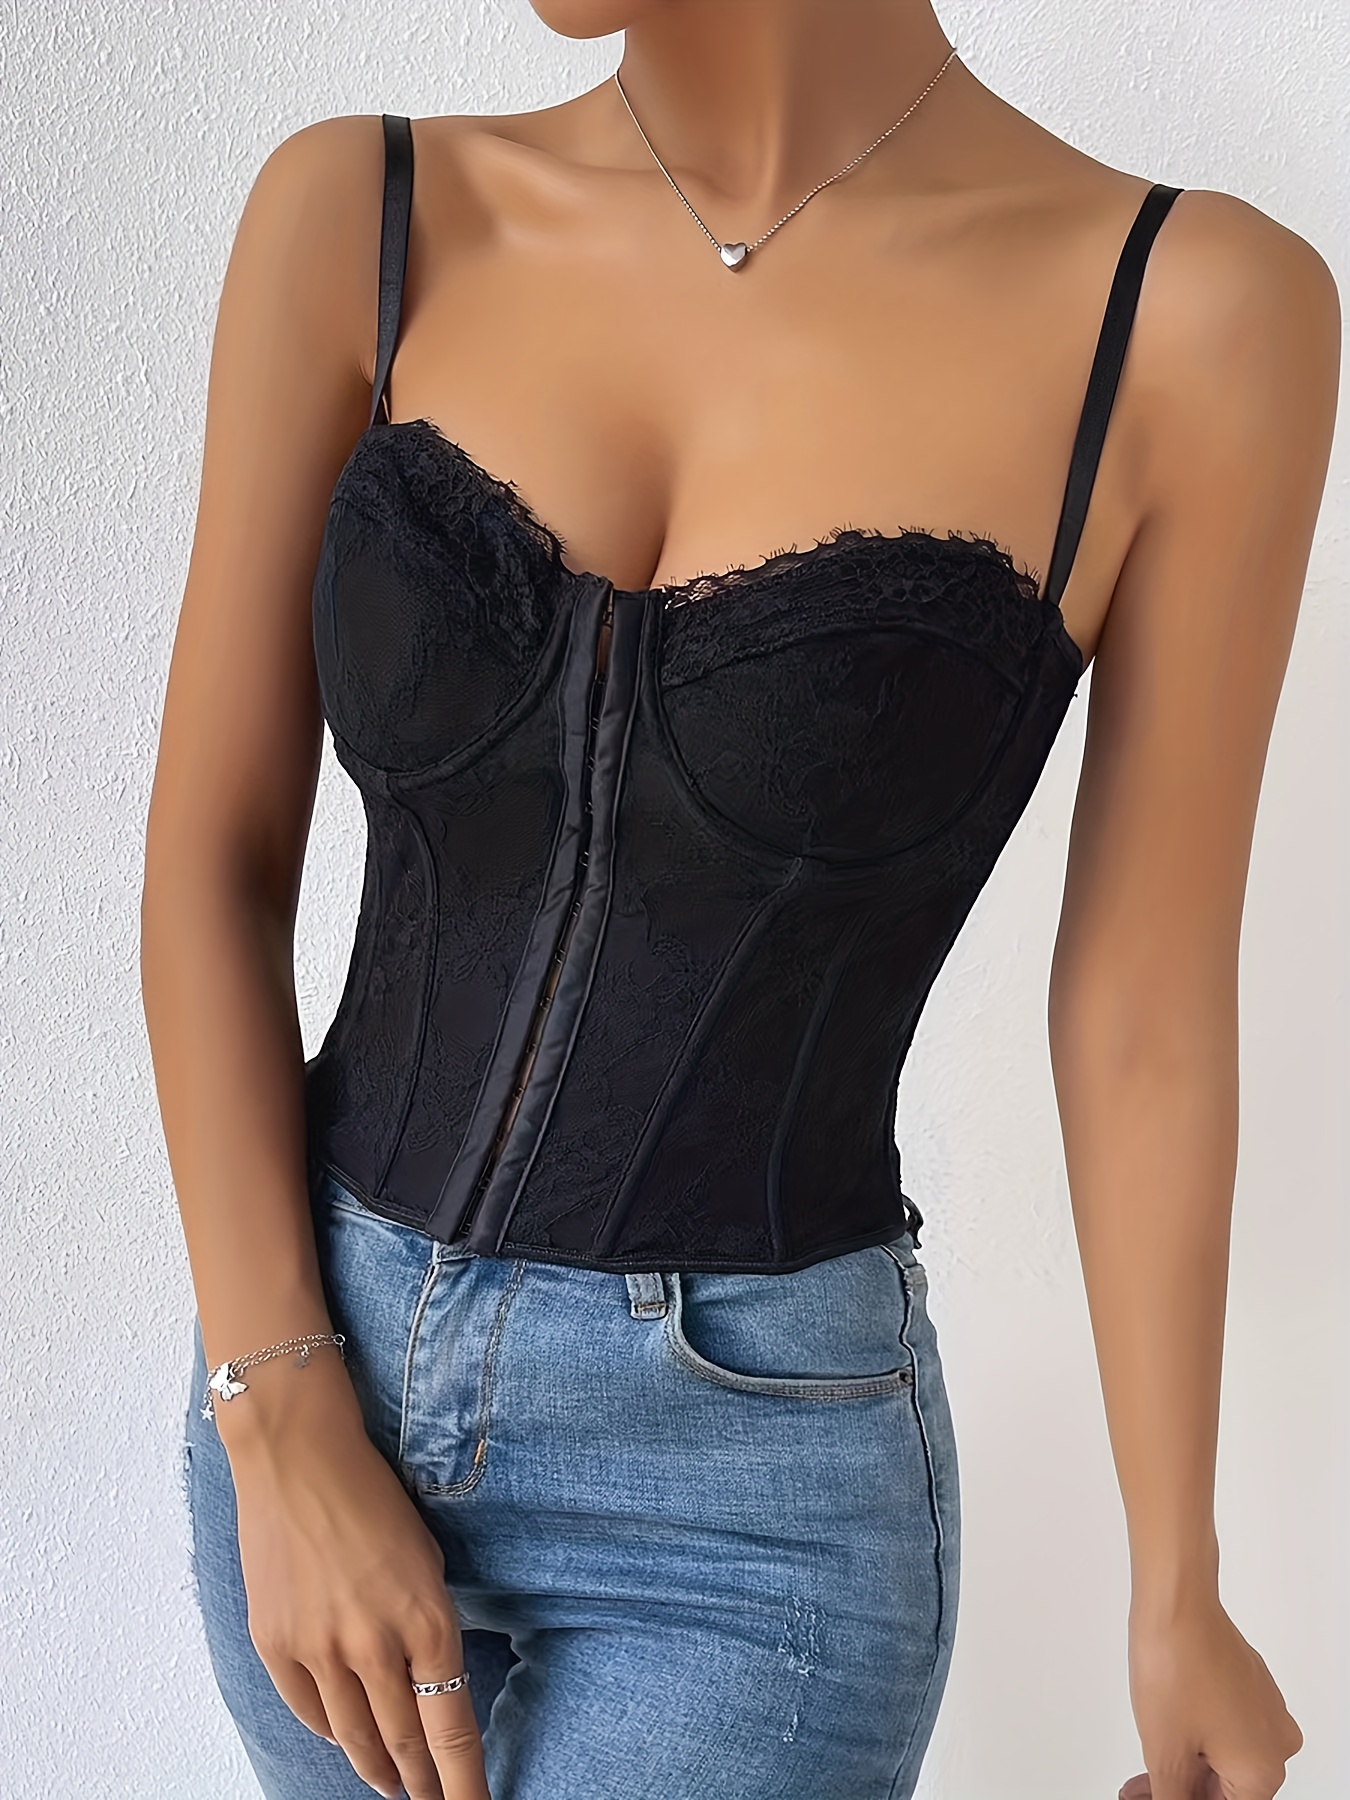 Tummy Control Shapewear Bustier Corset Top Pu Push Up Crop Tops Vintage  Tank Top Party Clubwear Bodice Body Shapers White XS